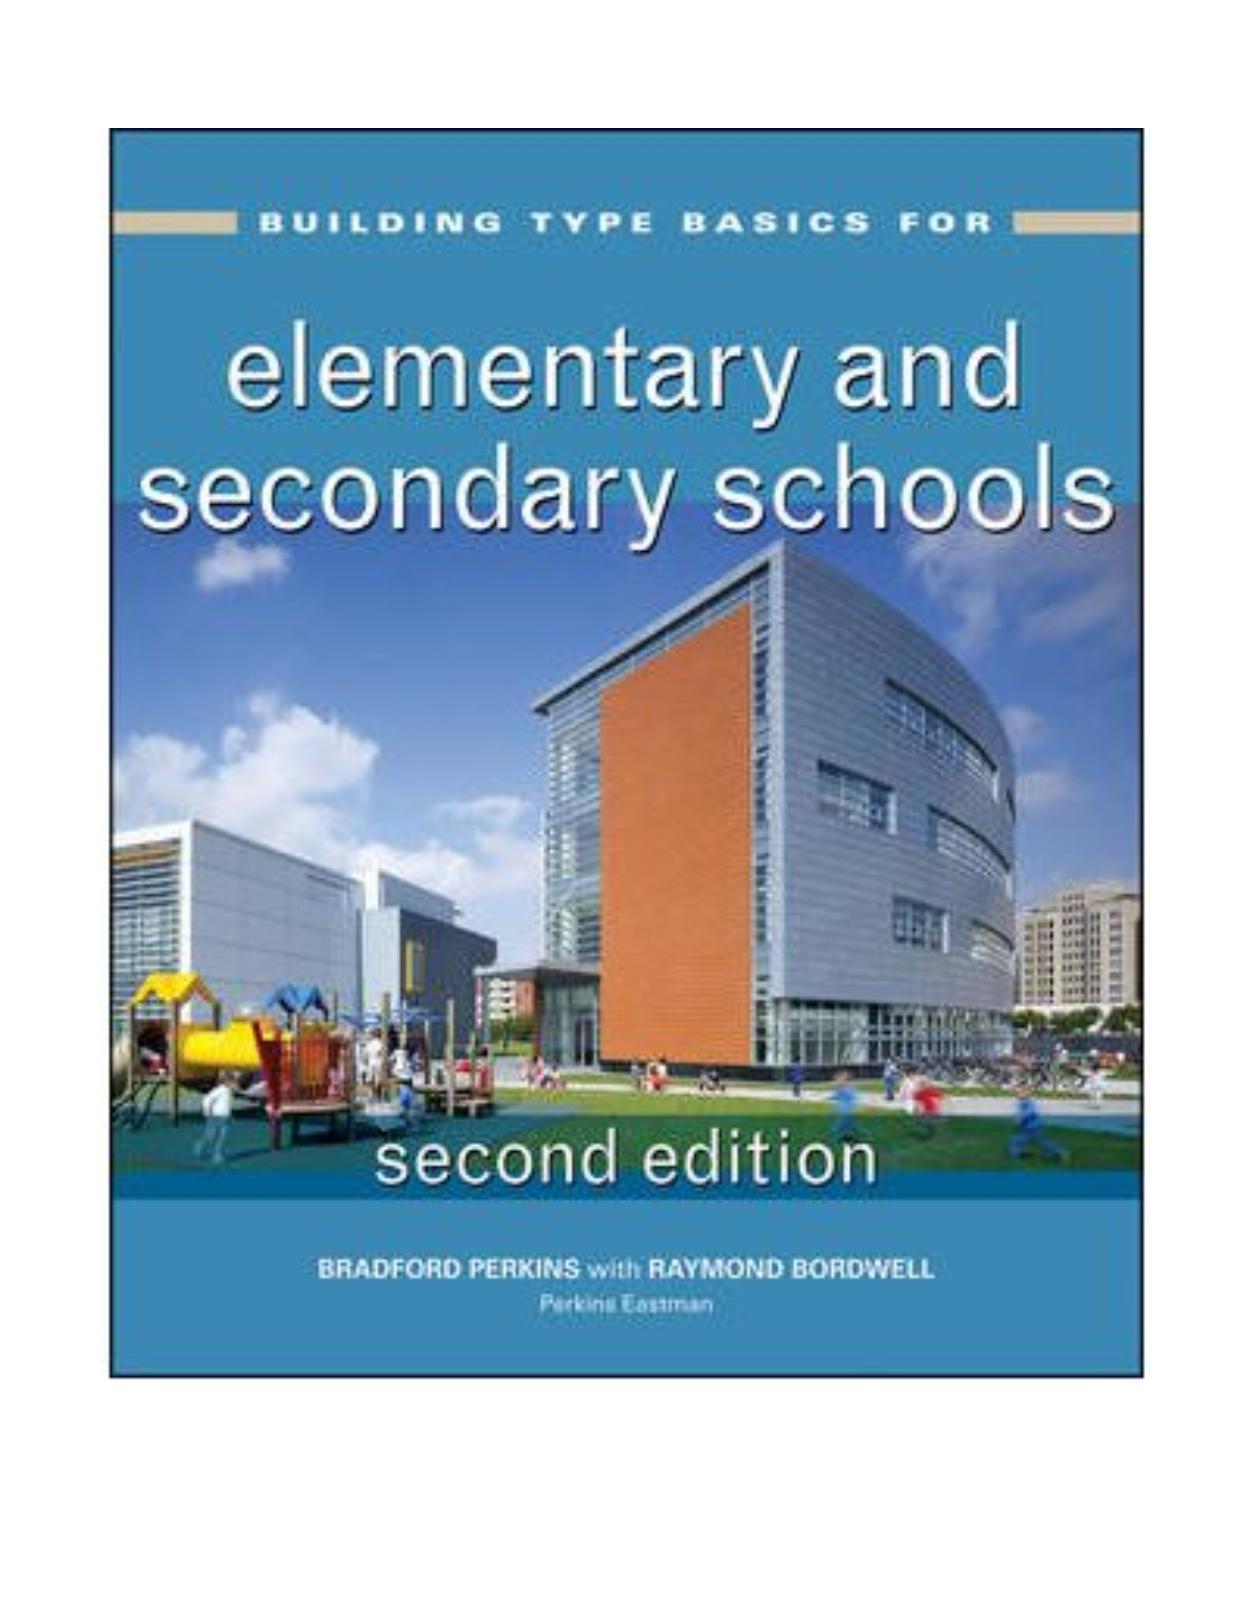 Building Type Basics for Elementary and Secondary Schools, 2nd Edition